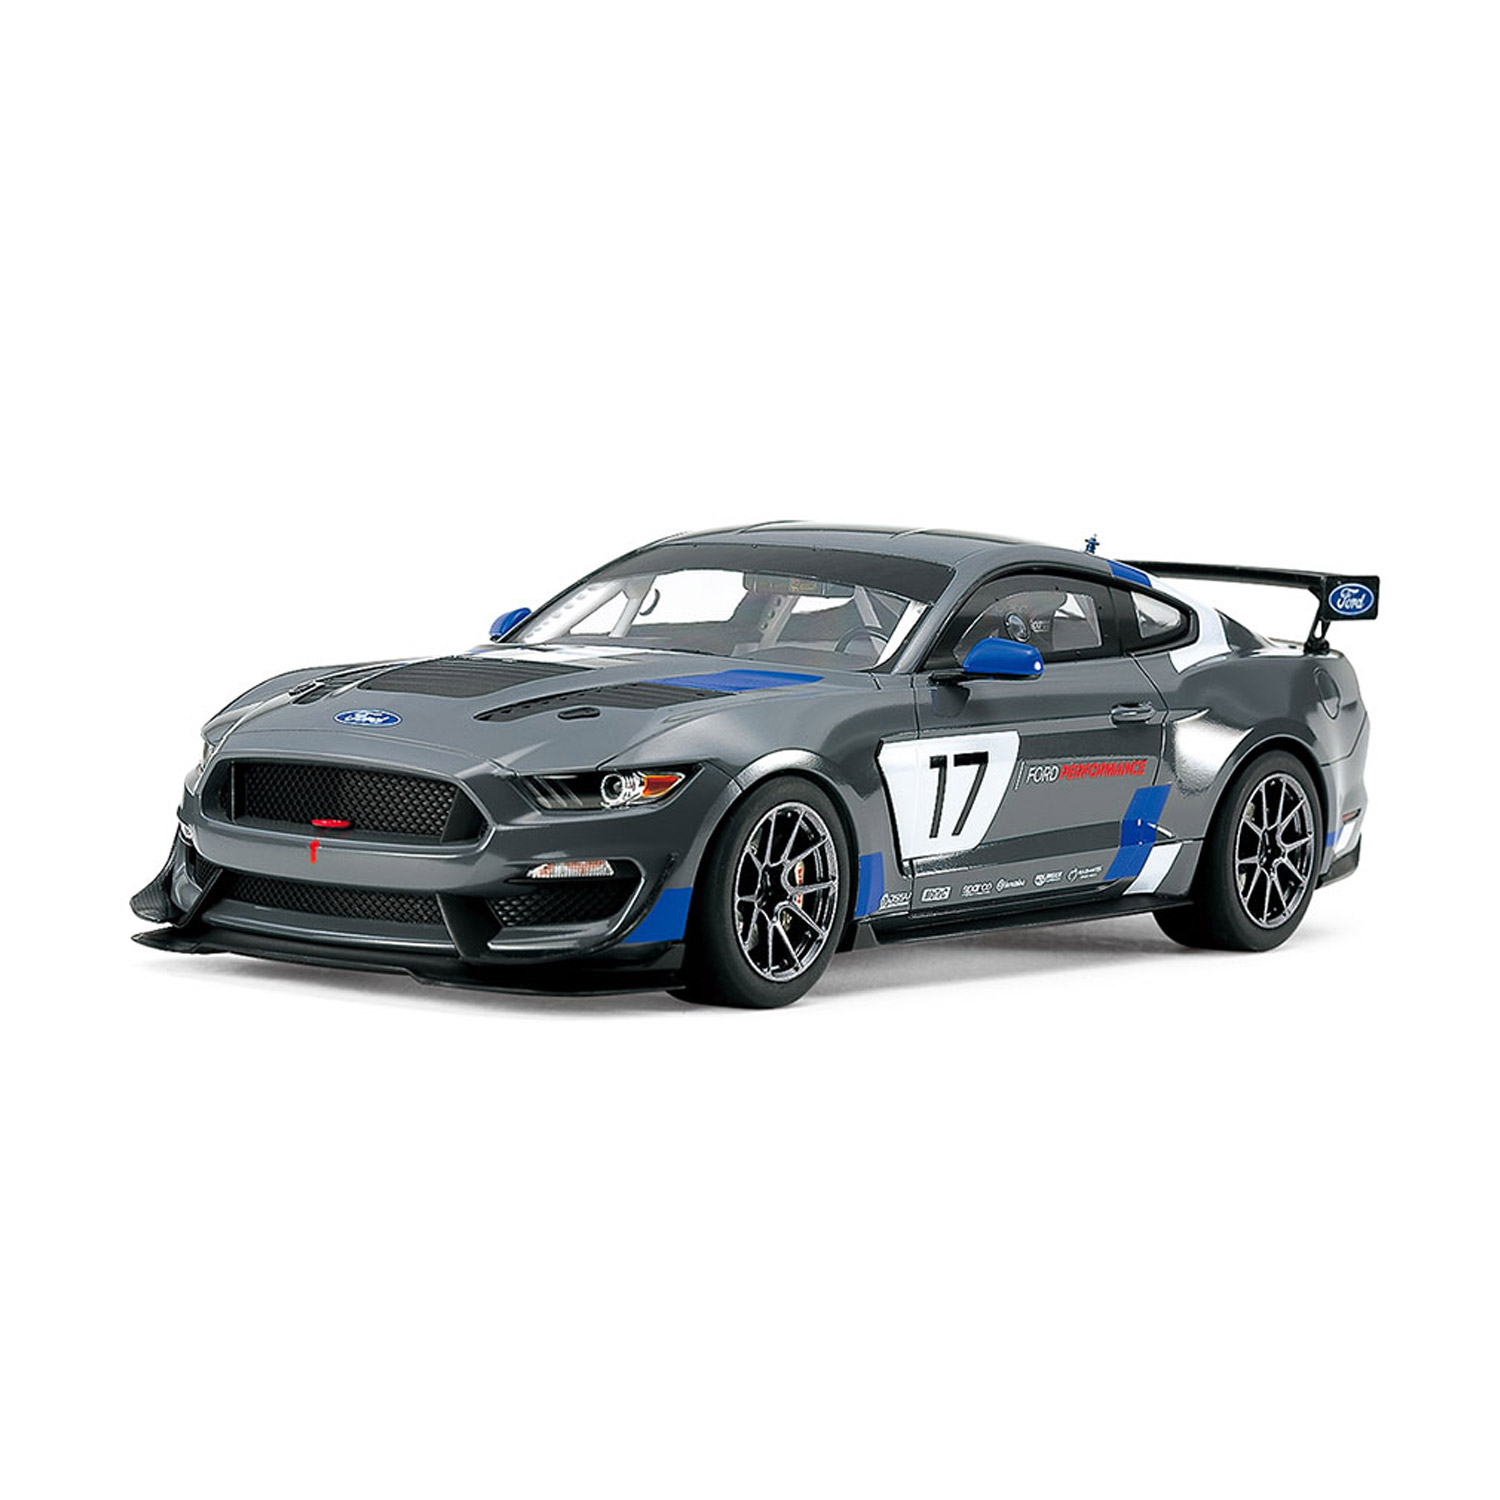 Maquette voiture : Ford Mustang GT4 - Maquettes Tamiya - Rue des Maquettes